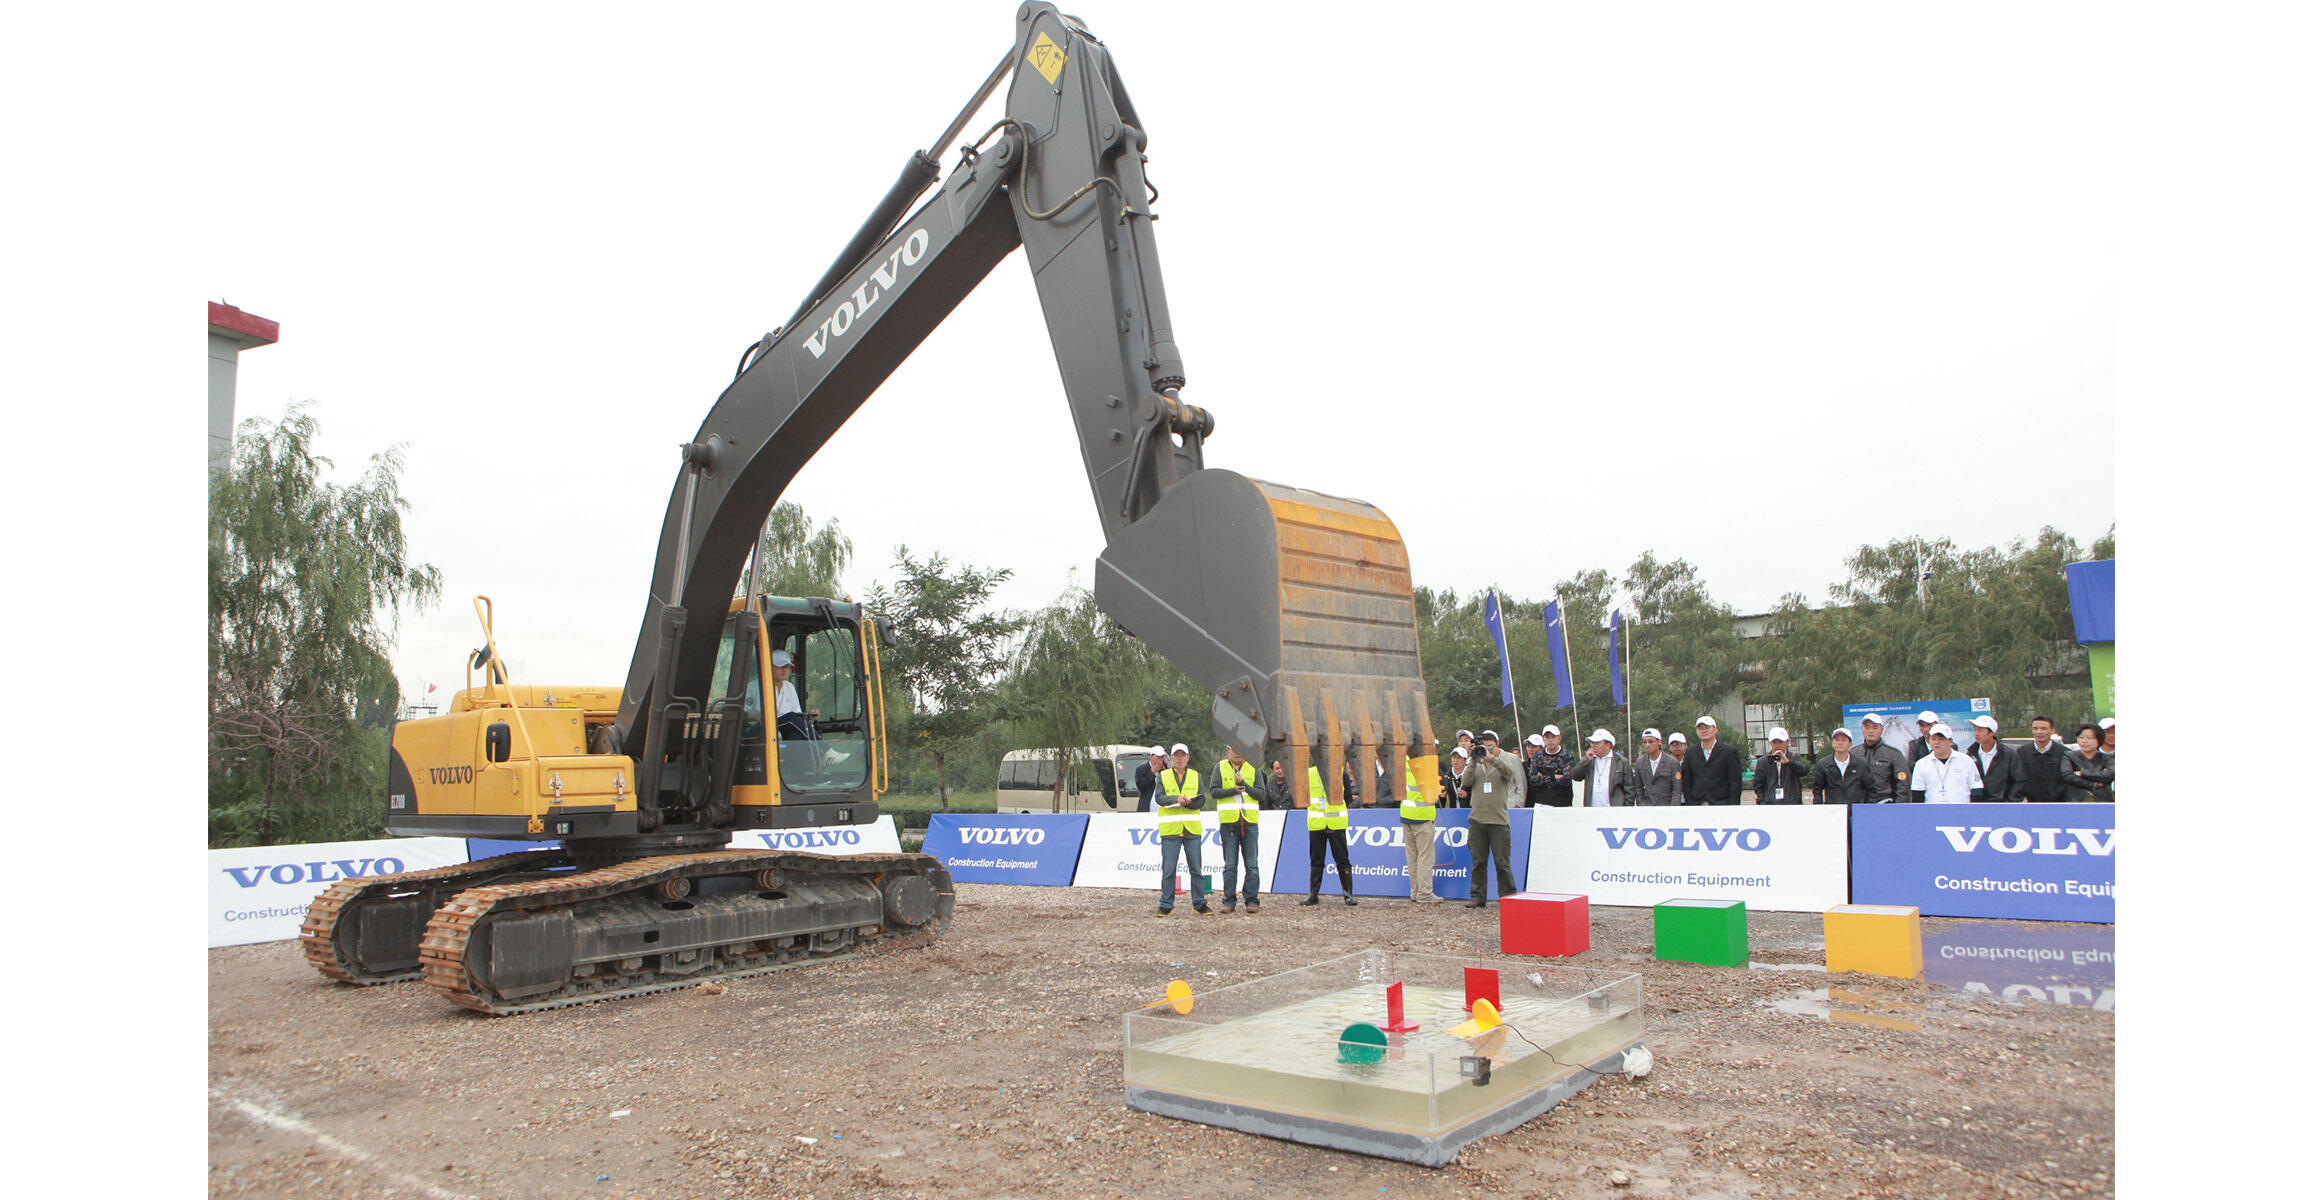 The operator of a Volvo EC210B crawler excavator participates in a test of skill and precision during Operator Idol.